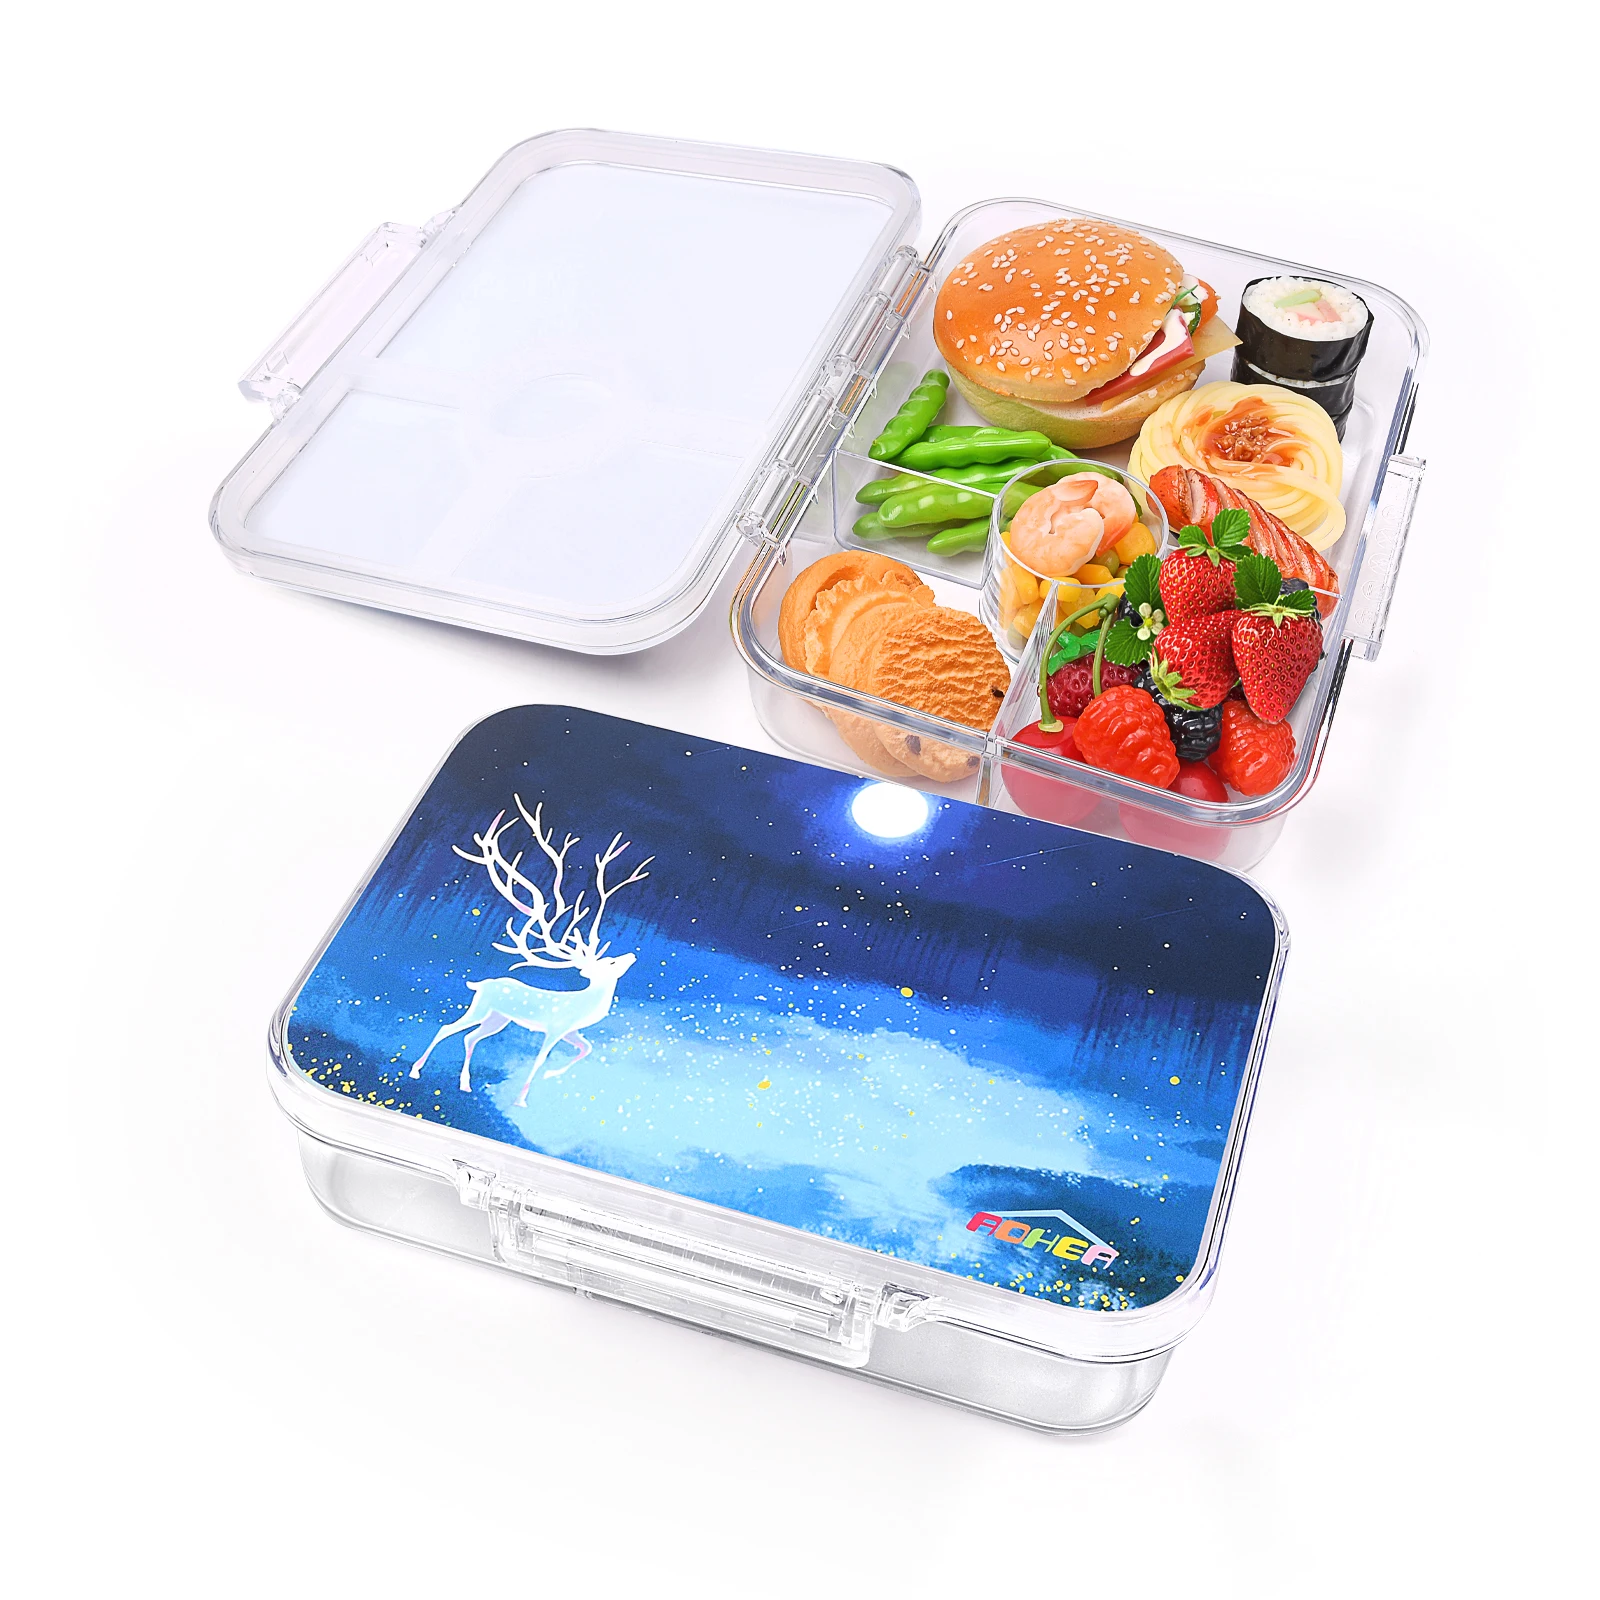 

Aohea best selling lunch box thermo children microwavable eco-friendly kids pp lunch box bento, Customized